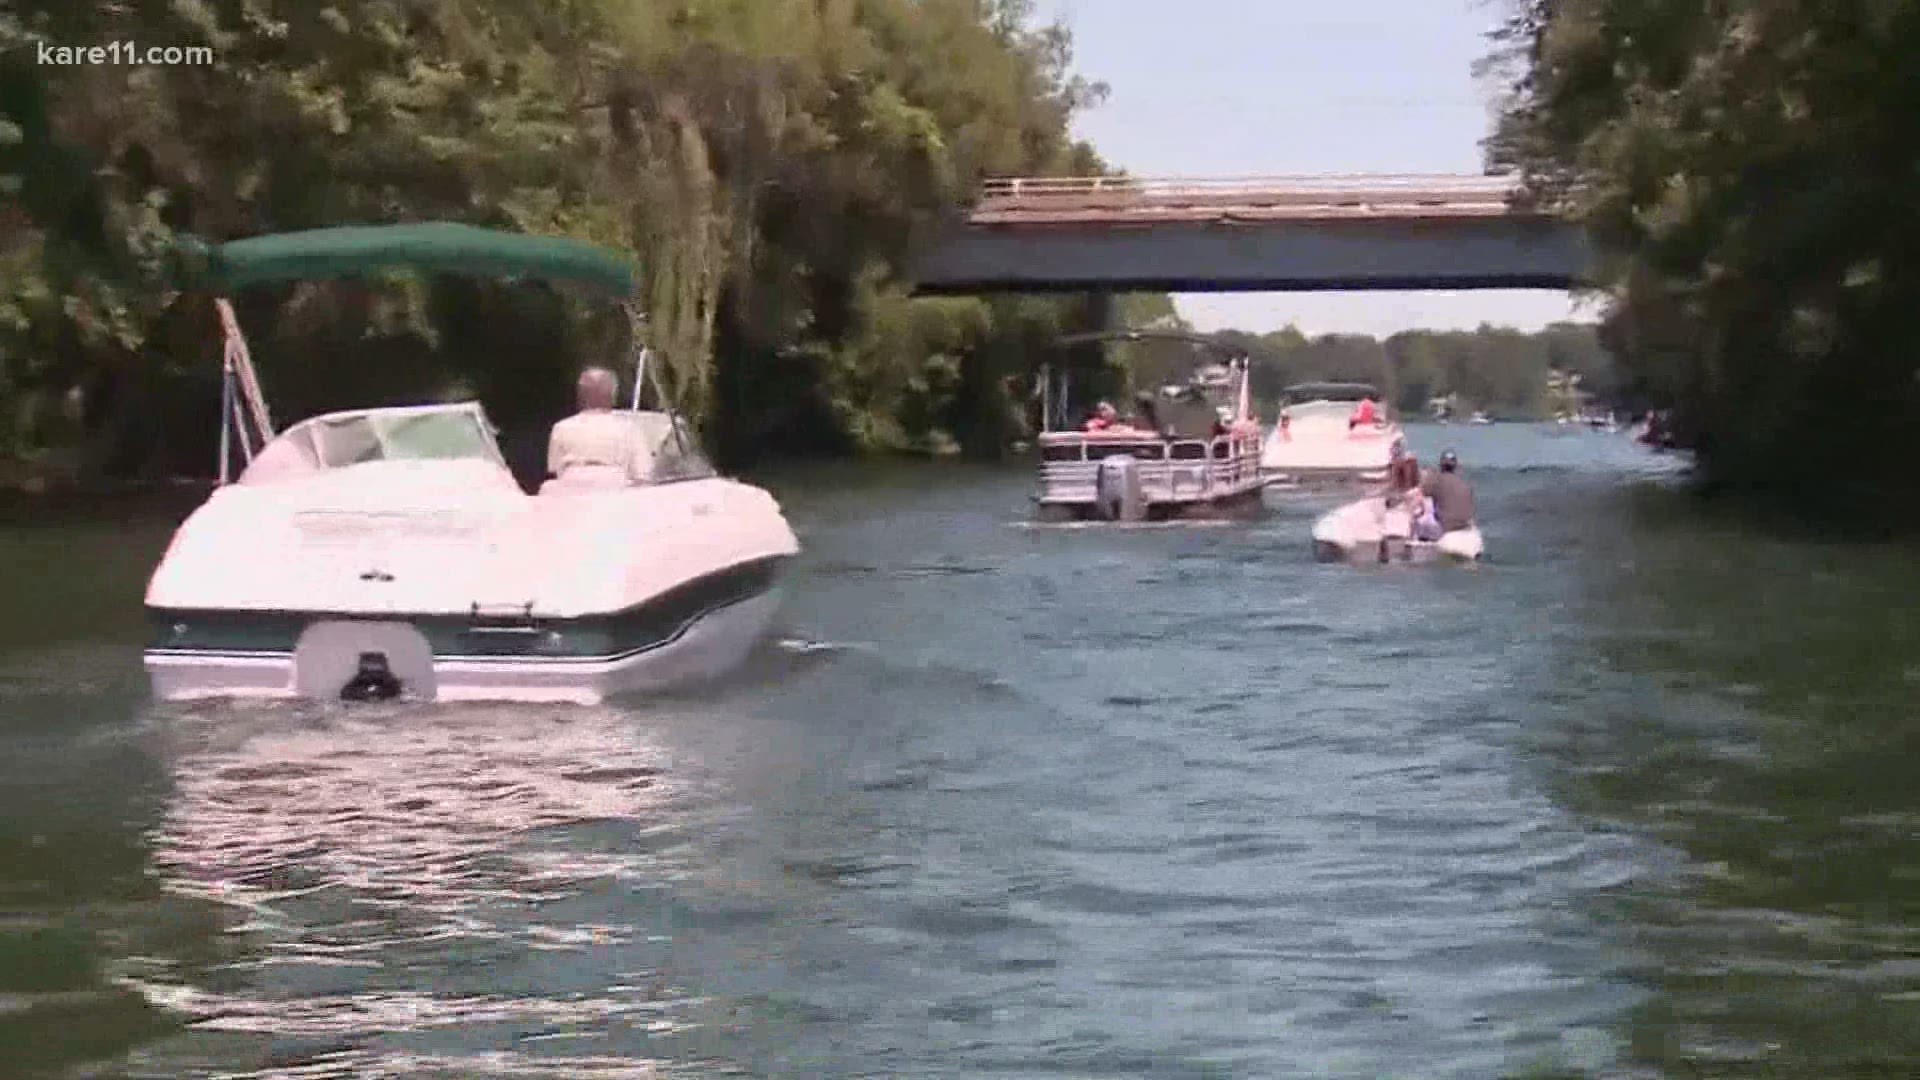 "There have been a ton of boats this year and a ton of new boaters this year."